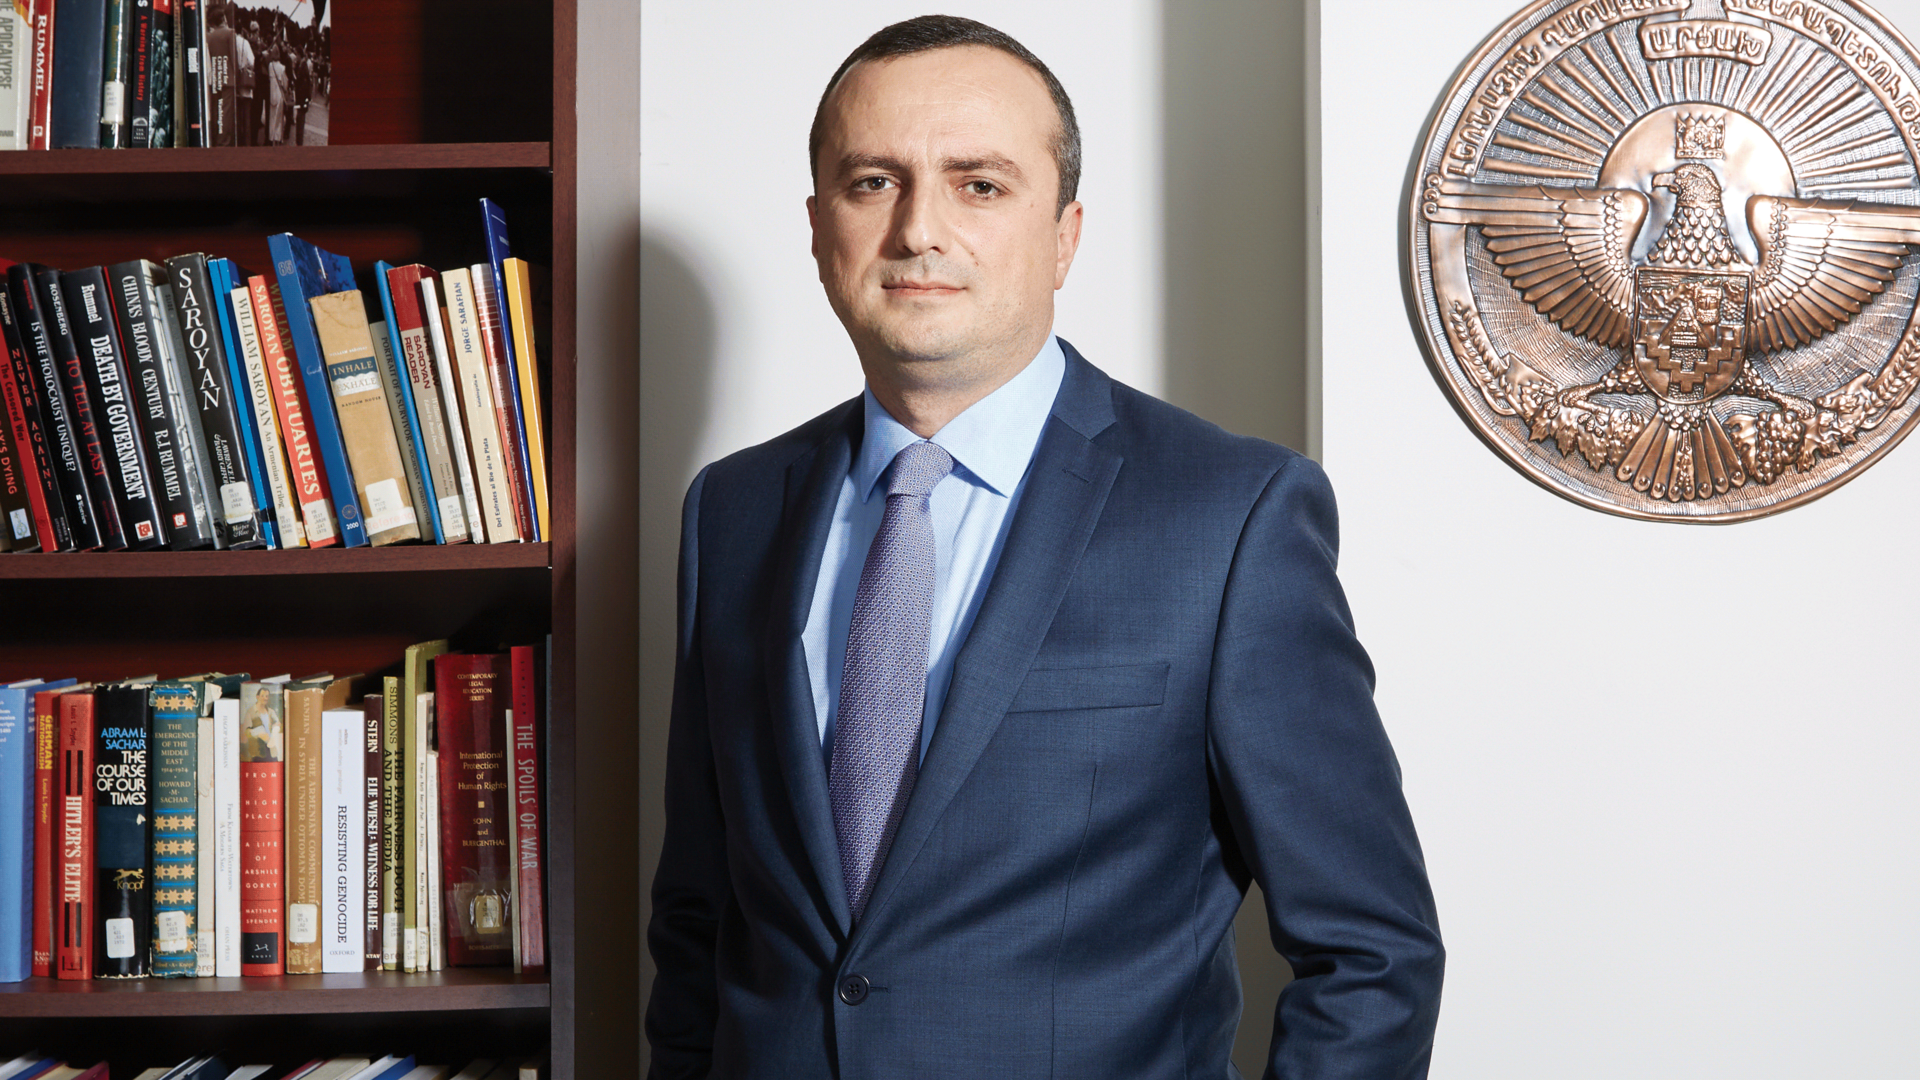 Robert Avetisyan, in a blue suit, stands on the side of a bookshelf.